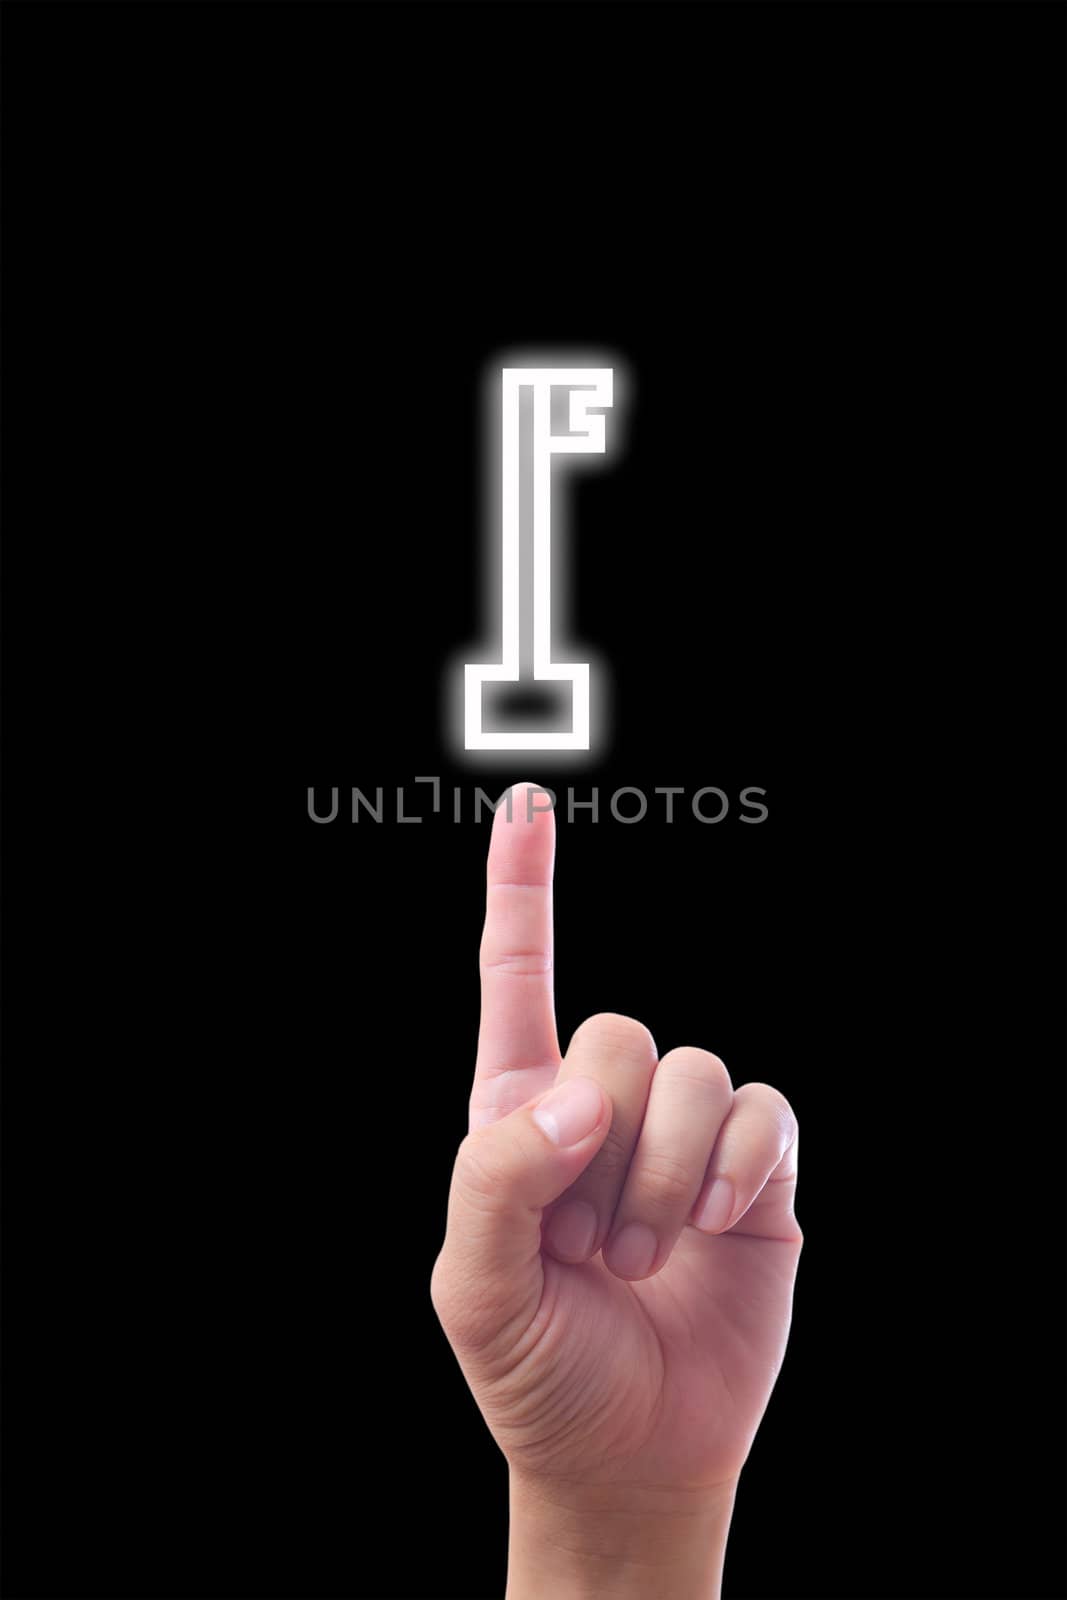 hand pointing to key icon